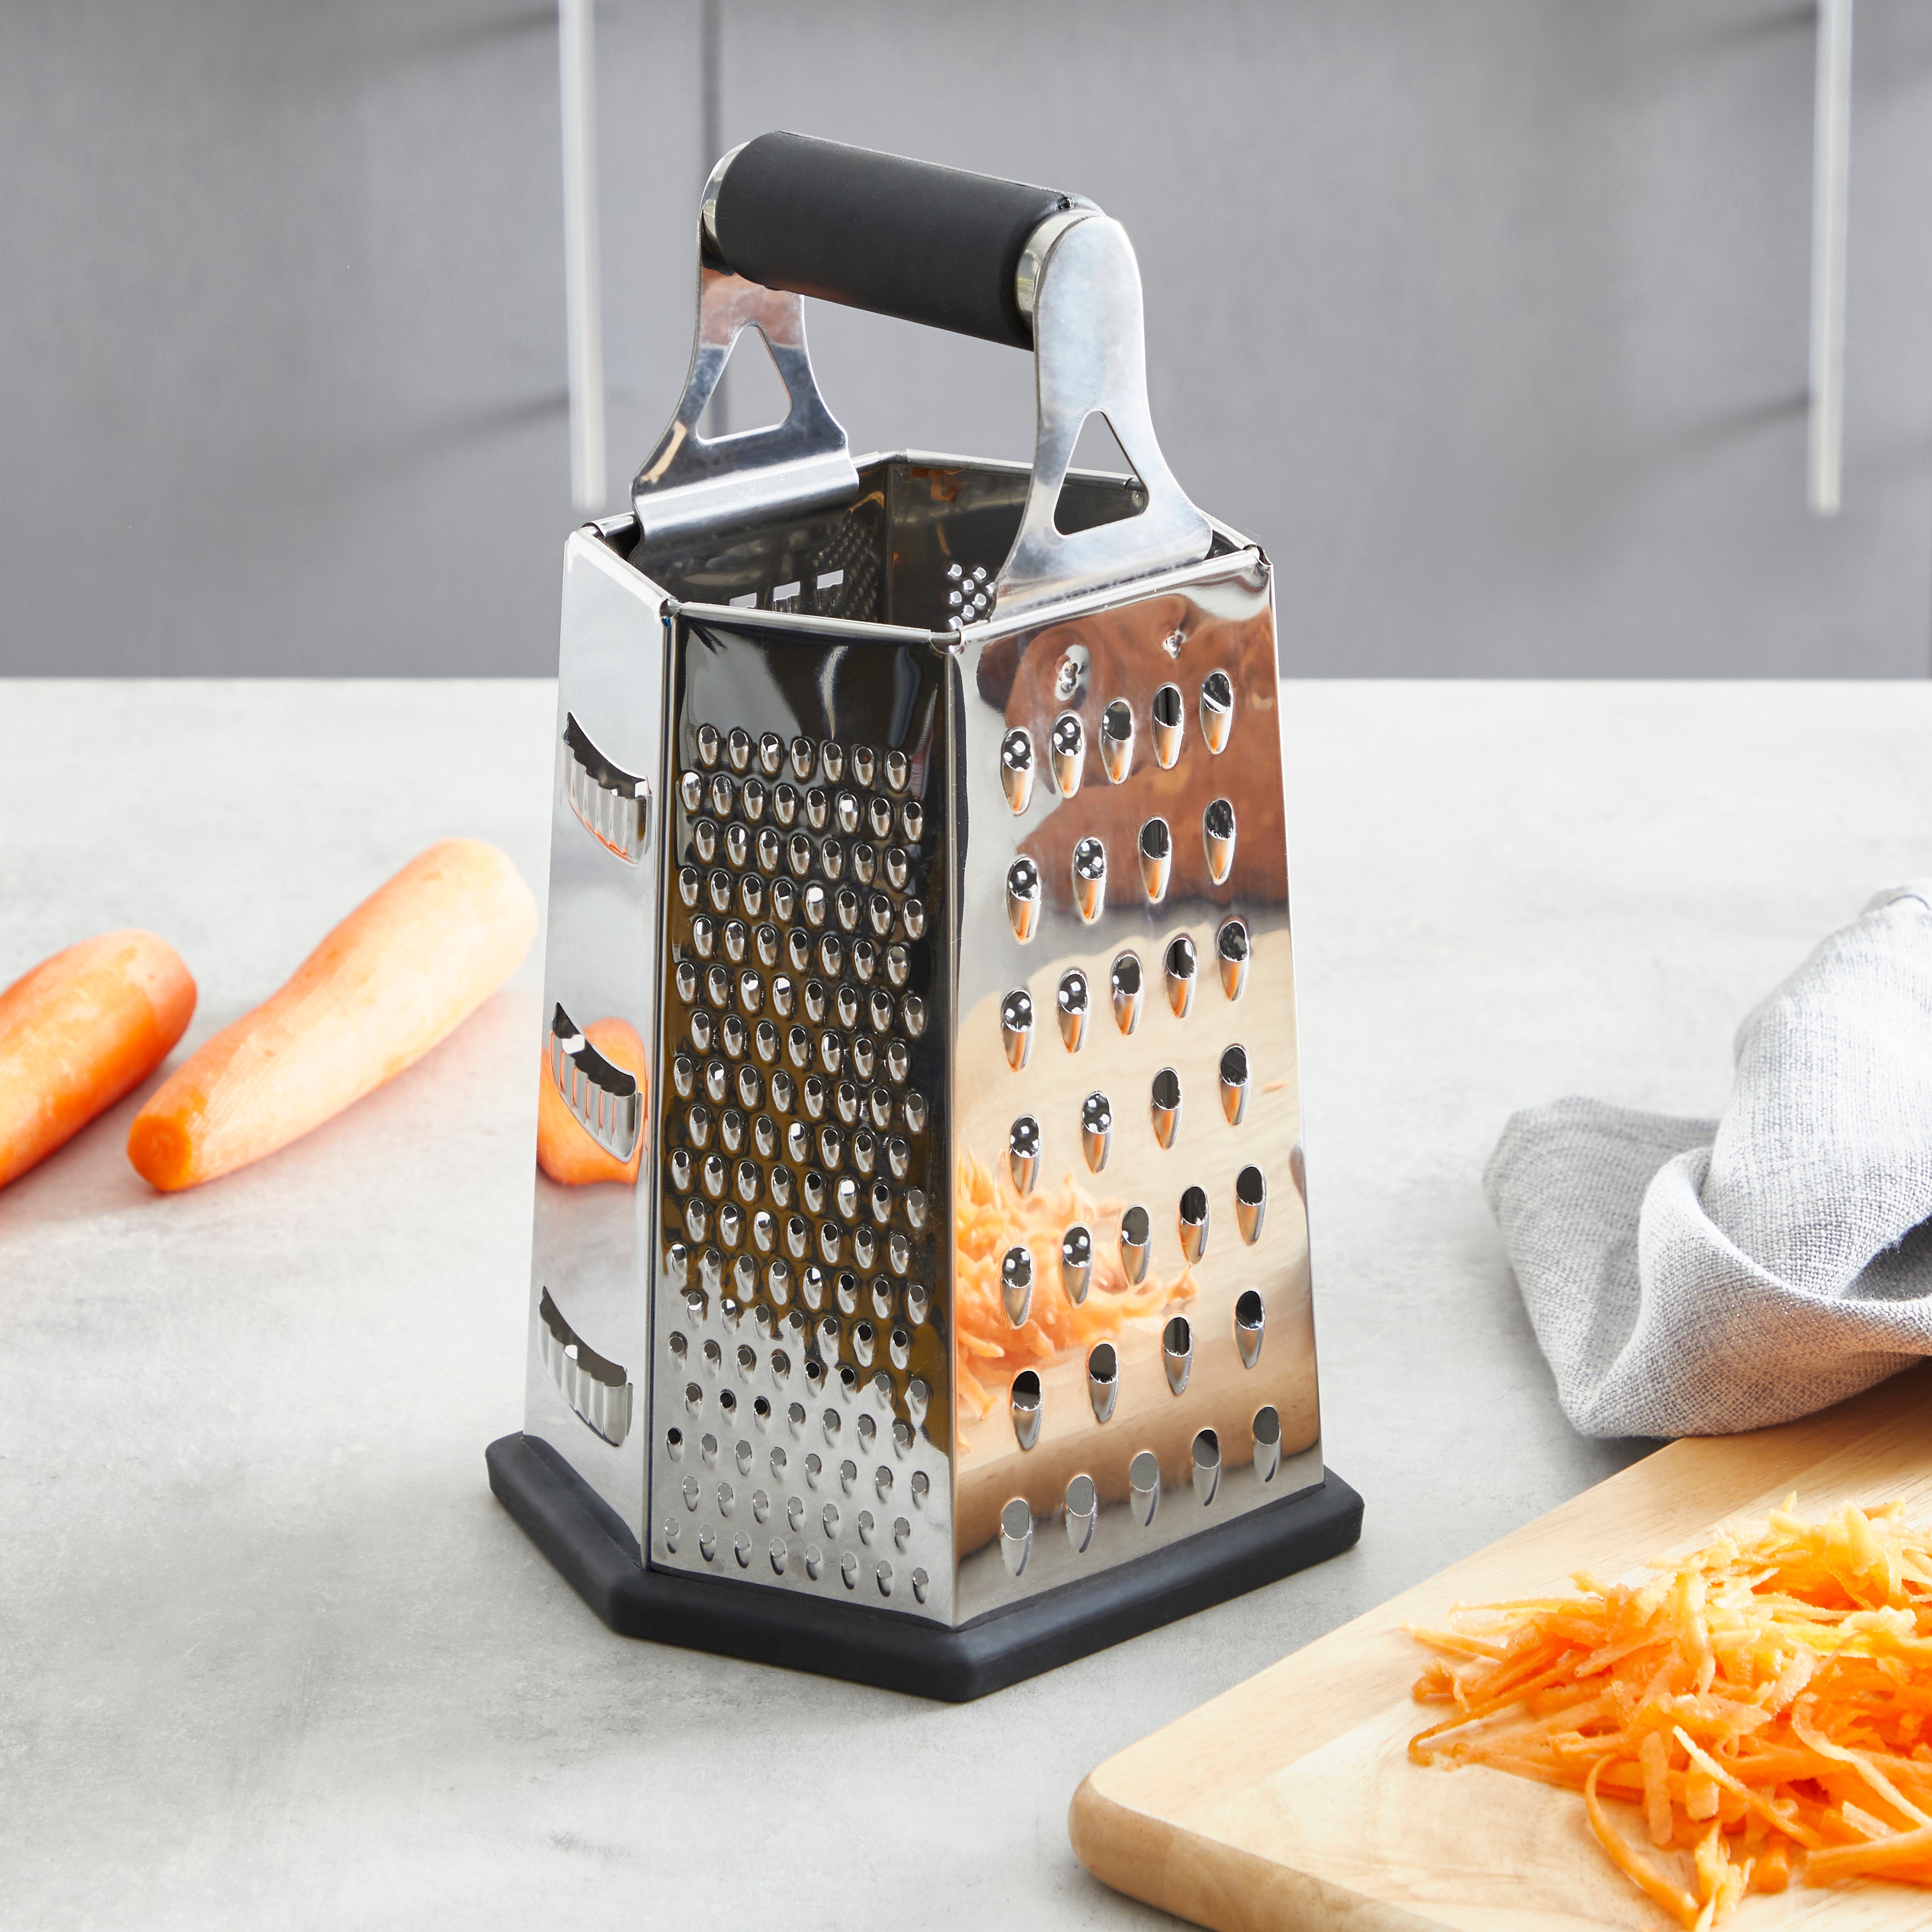 Professional 6 Sided Box Grater